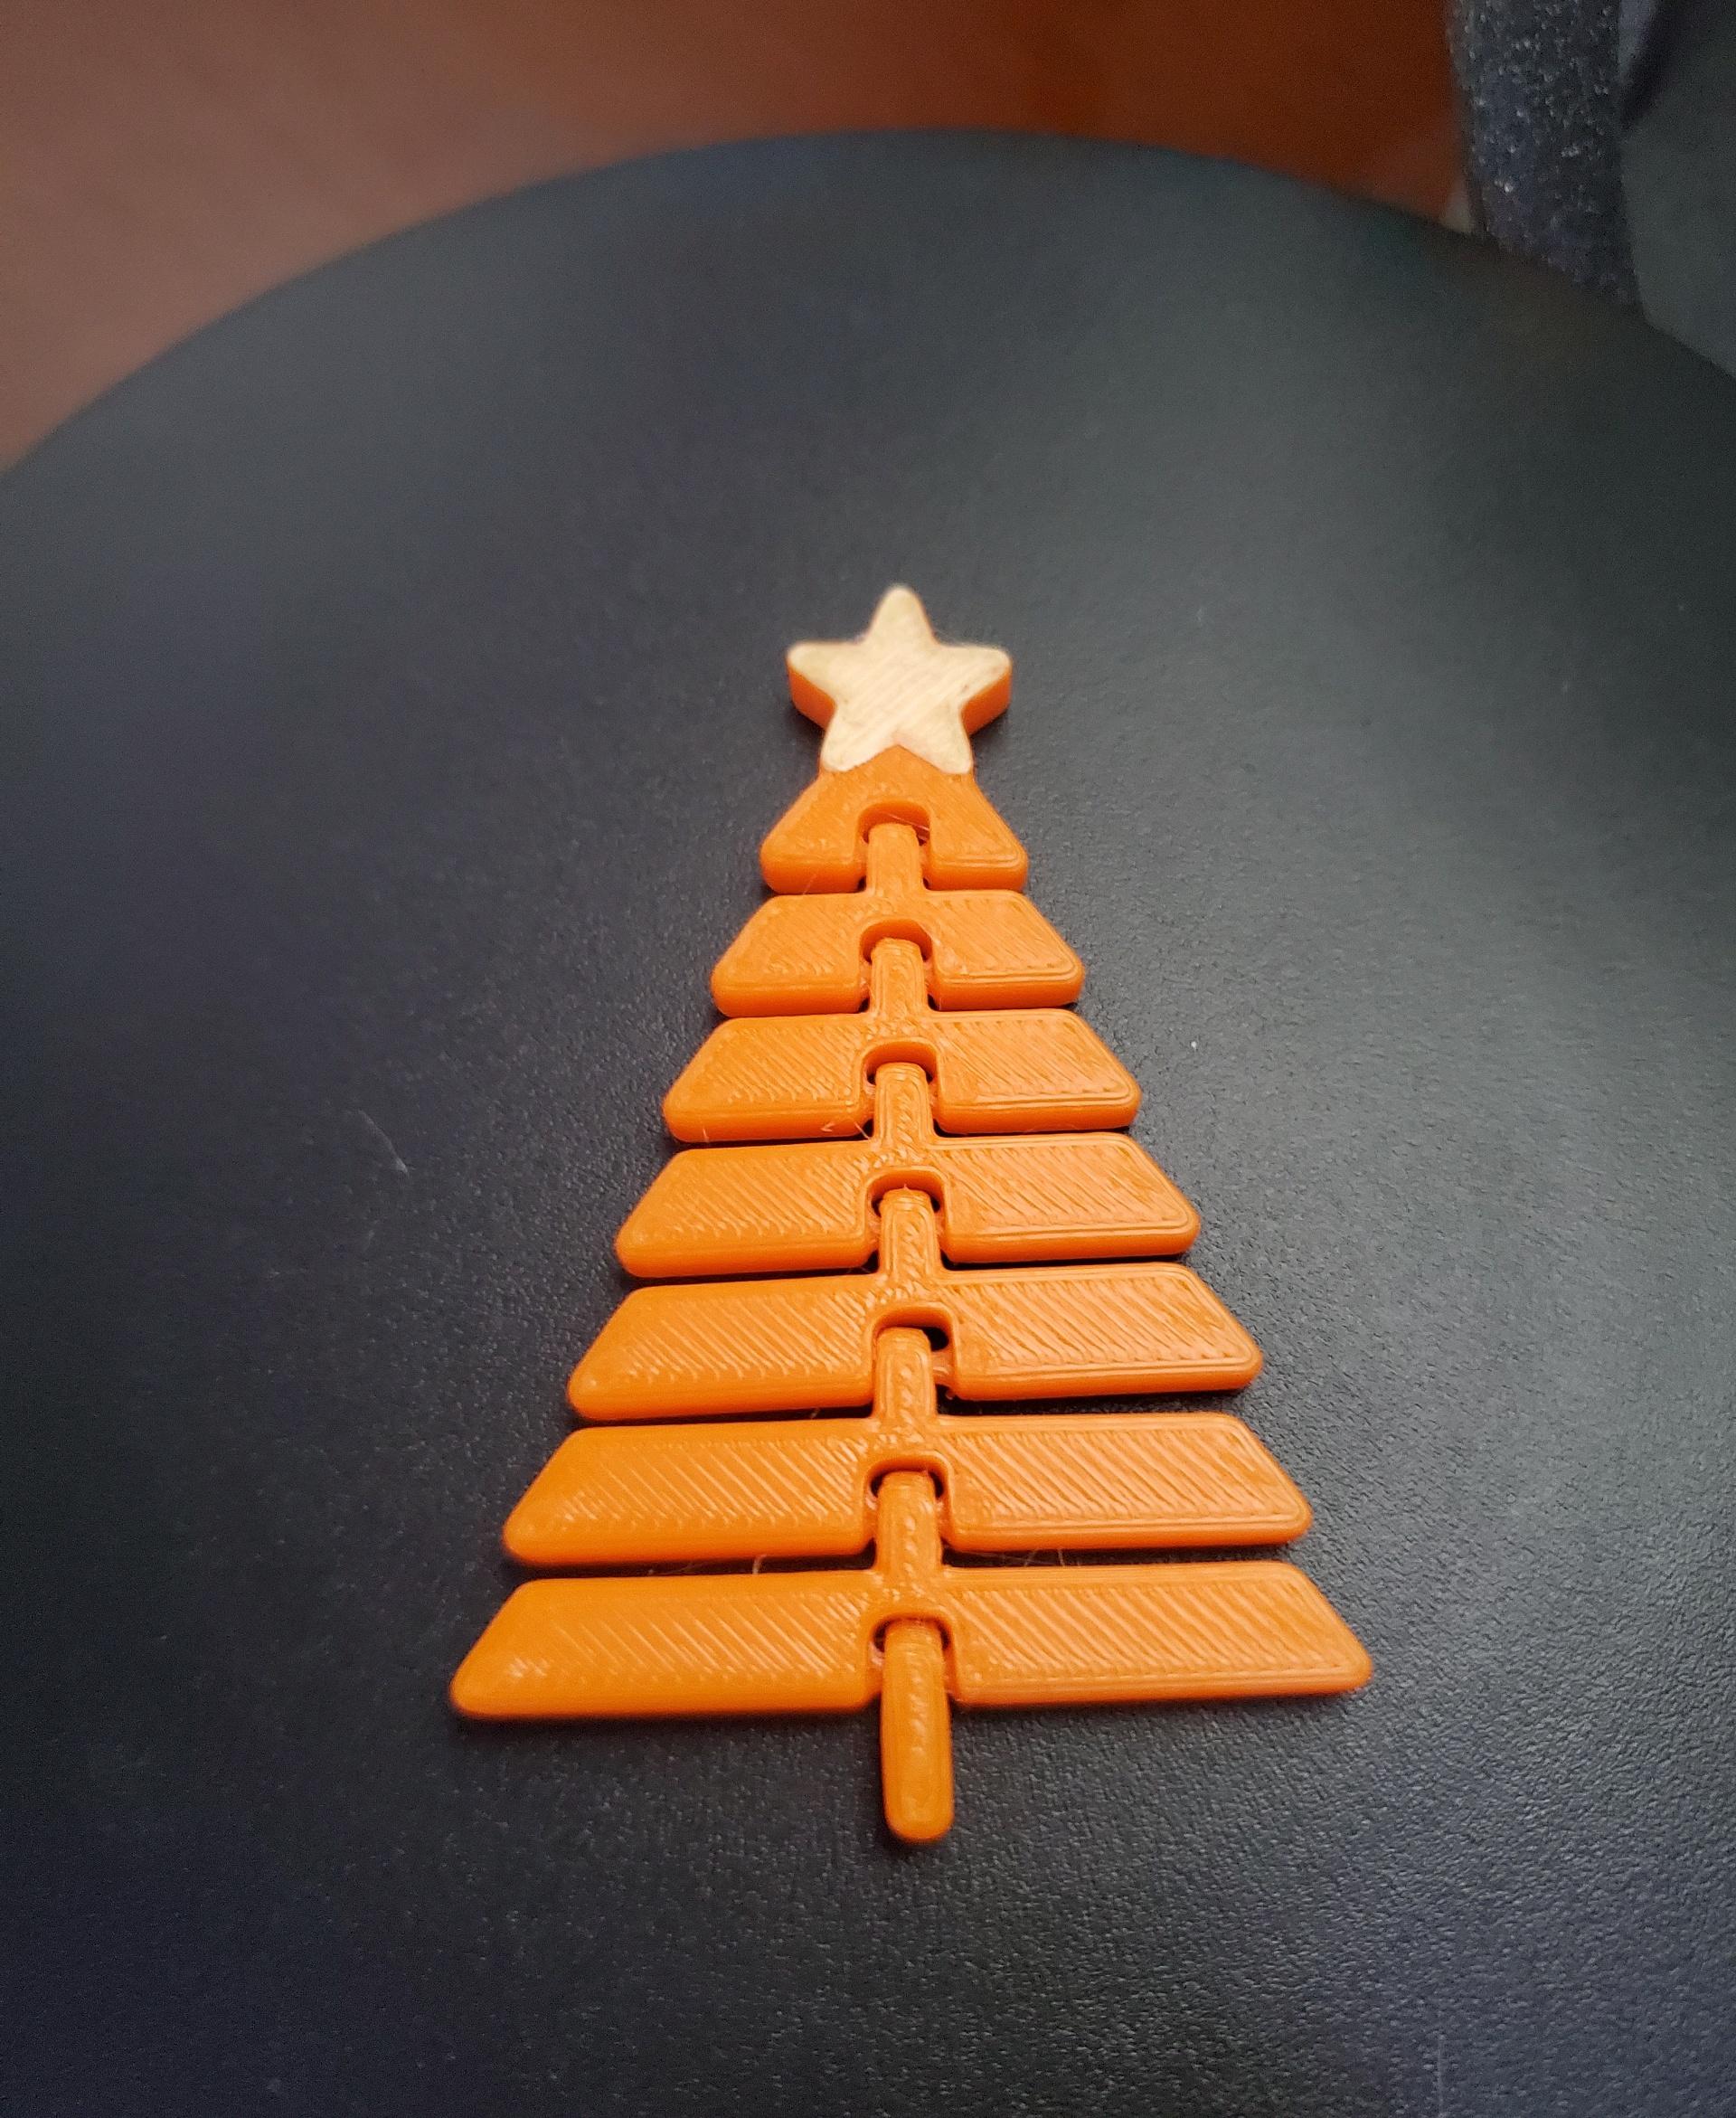 Articulated Christmas Tree with Star - Print in place fidget toy - 3mf - polymaker orange pla pro - 3d model